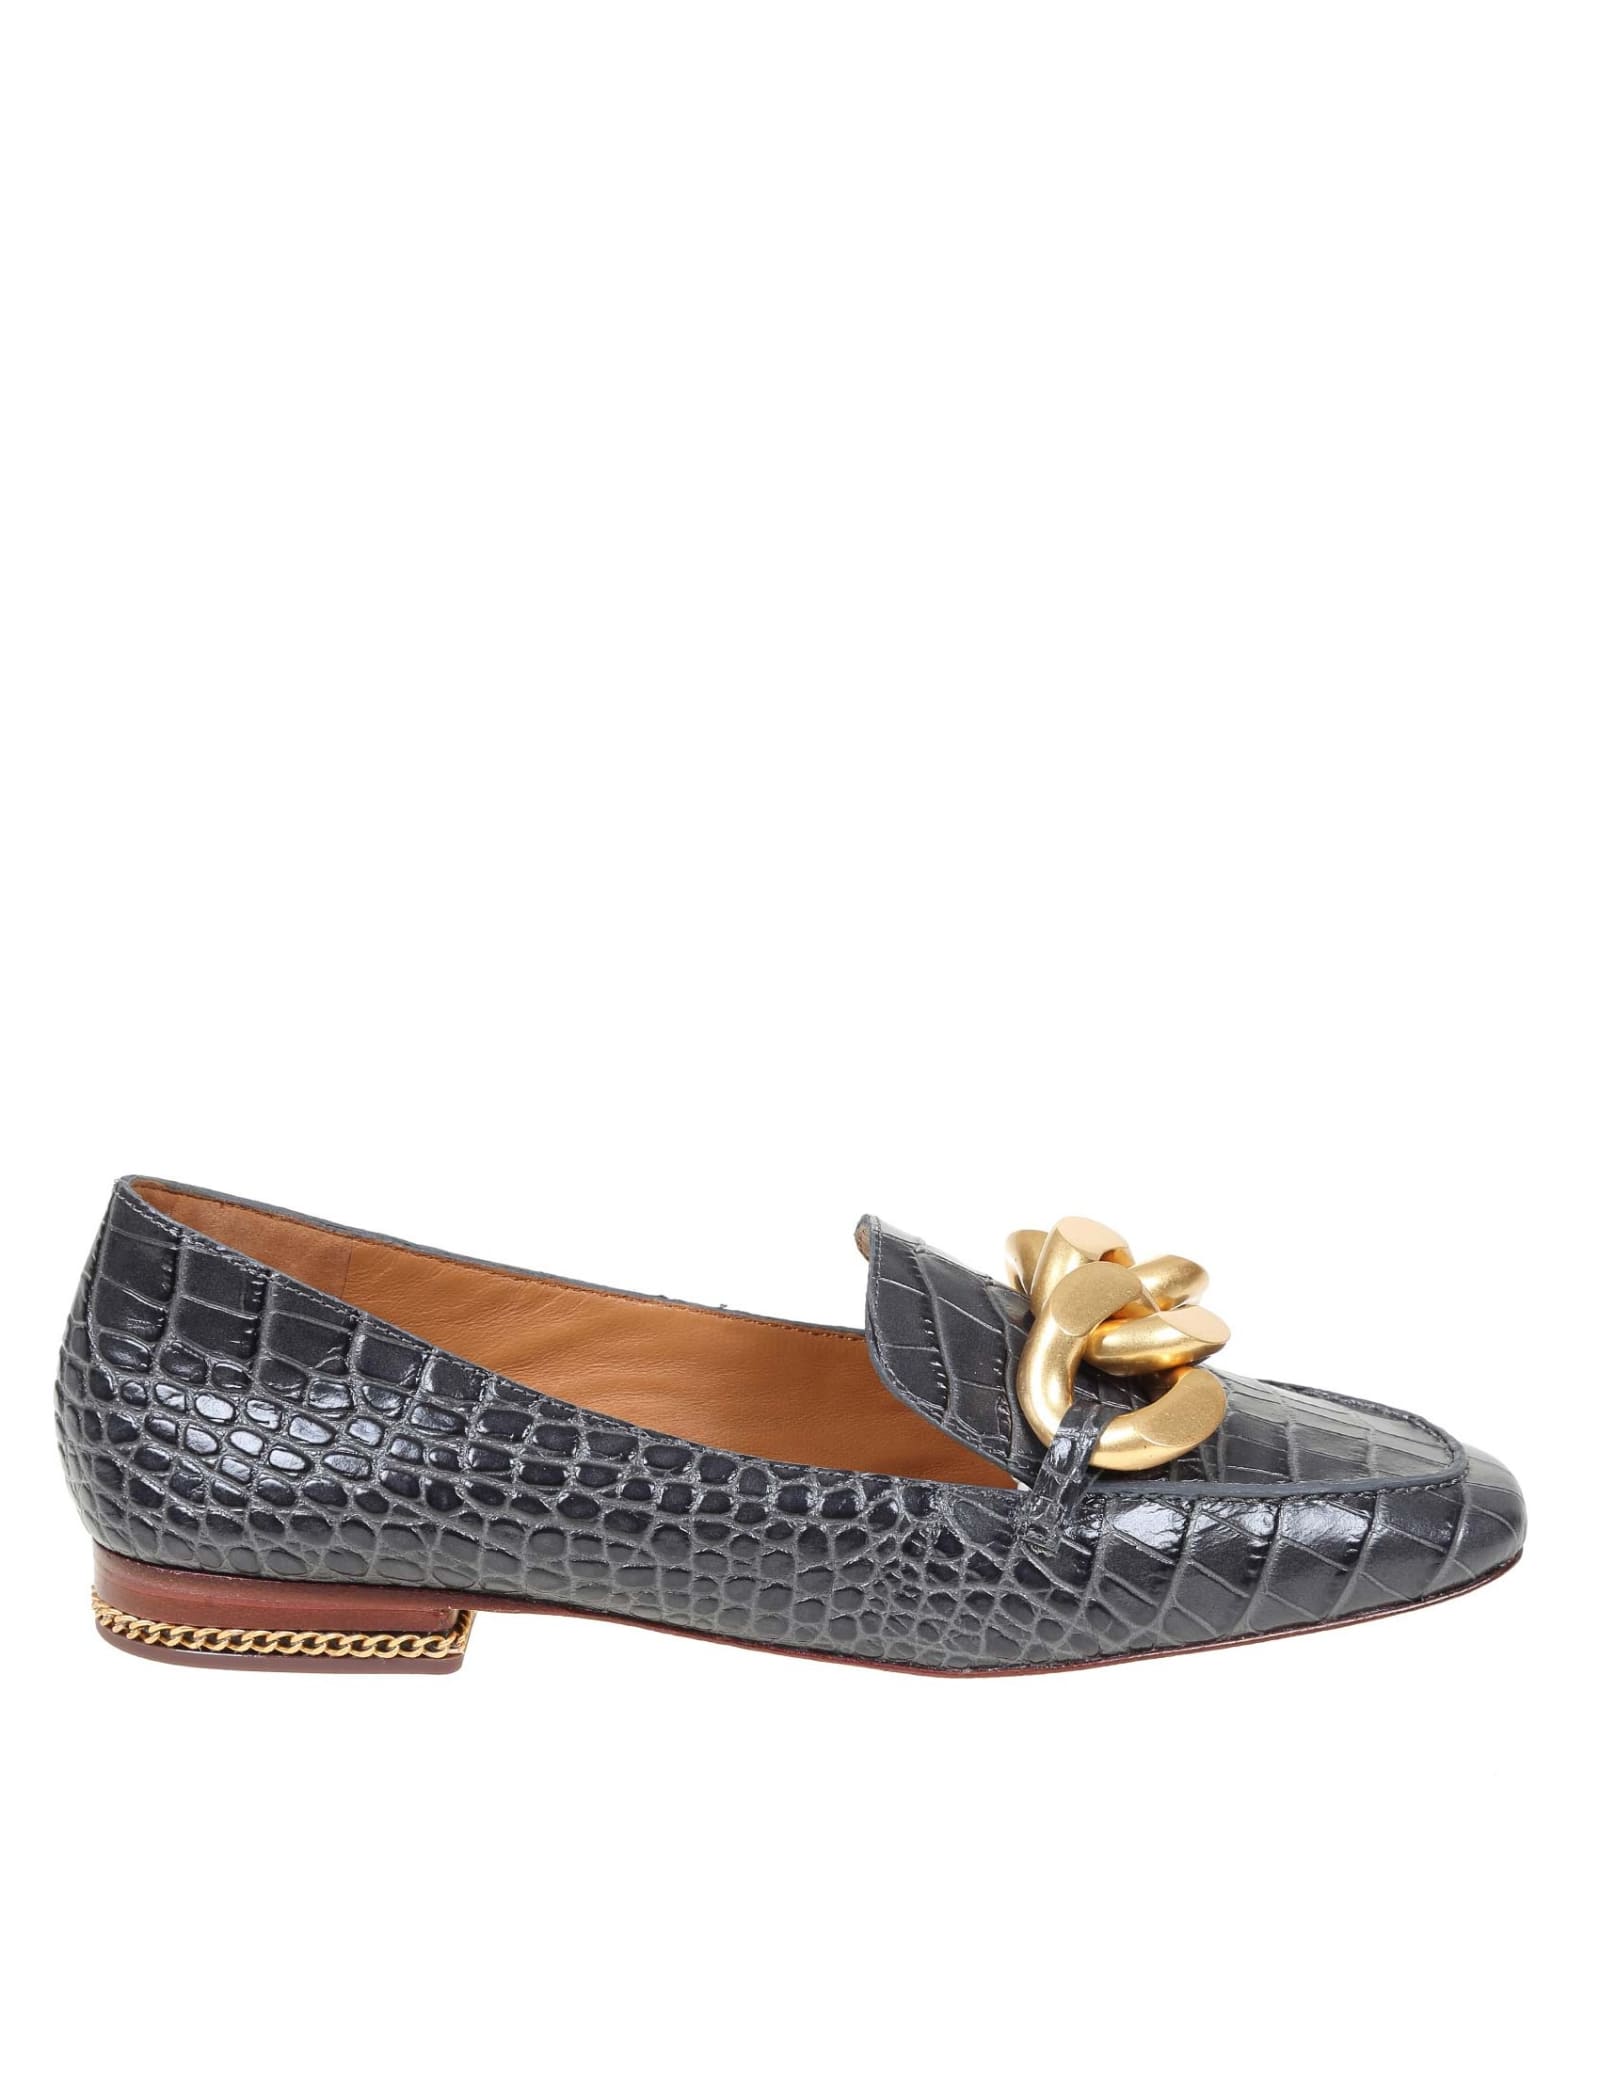 Tory Burch Leather Loafers With Gold Chain